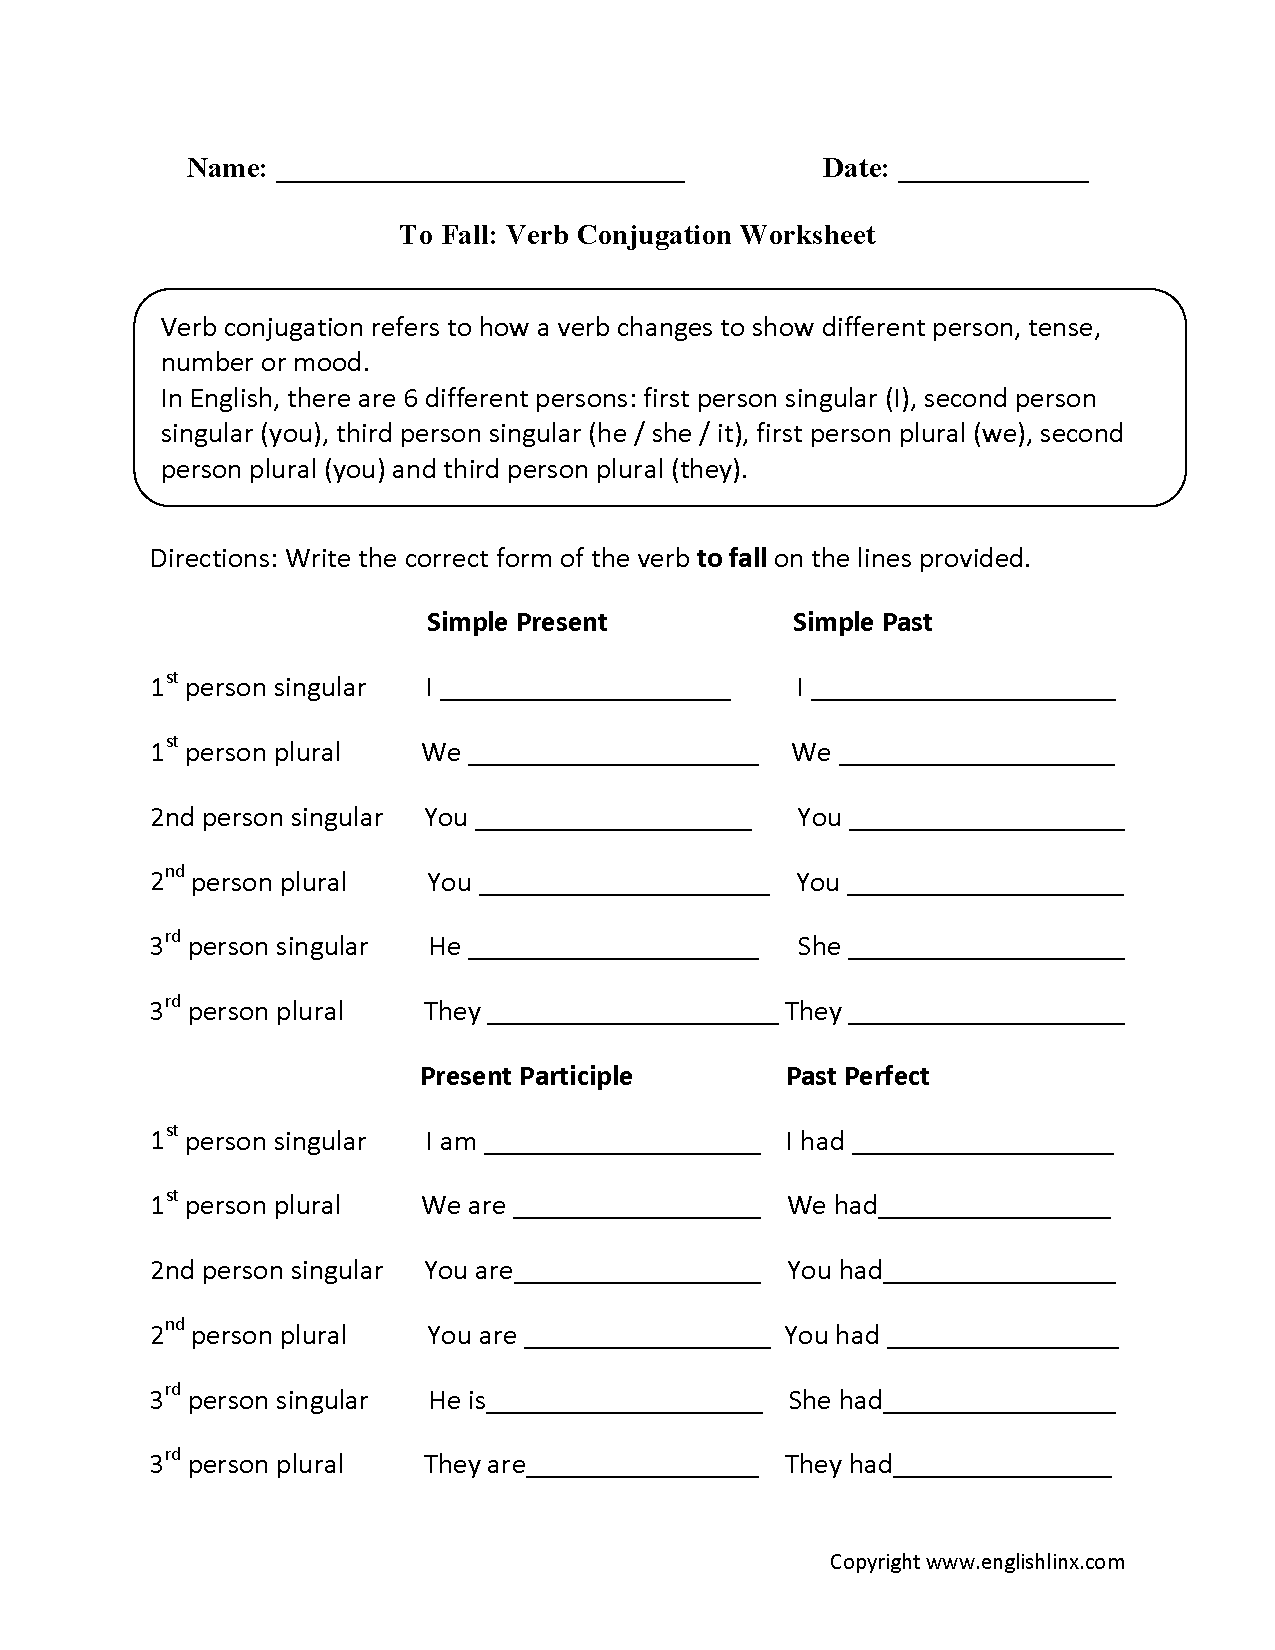 To Fall Verb Conjugation Worksheets